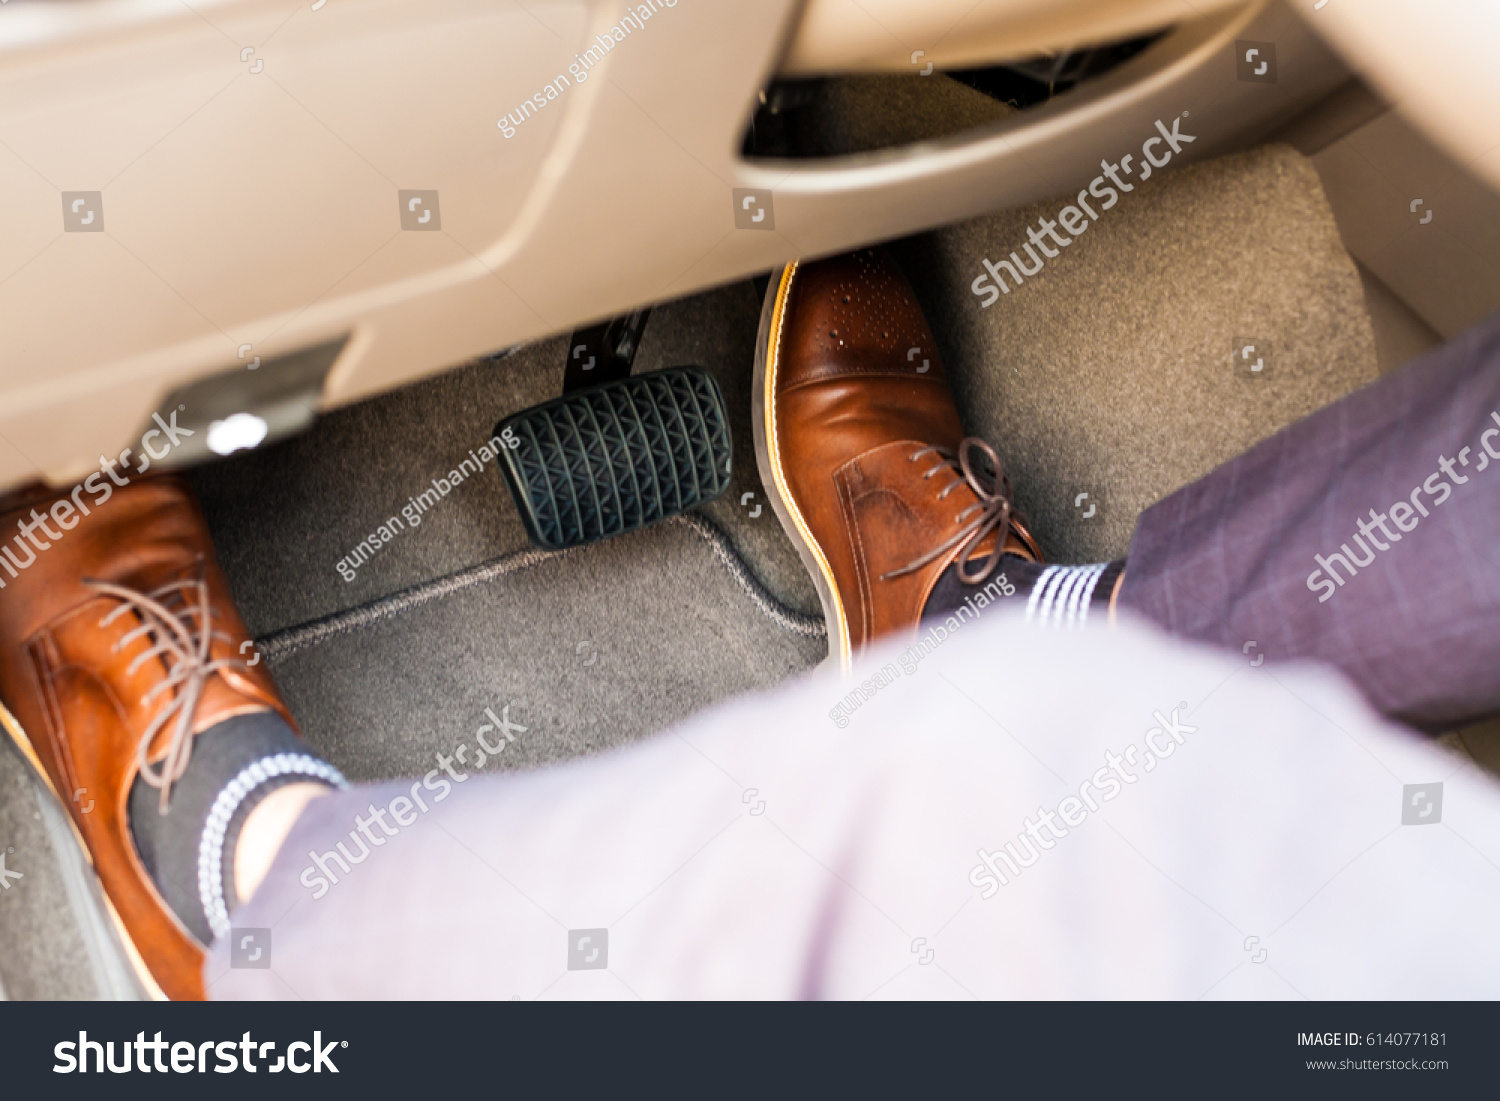 Closeup of a thirties man wearing brown shoes carrying a car accelerator and a brake / car safety system on the feet Accident and brake, danger of auto motor-driven bikes, driving habits #614077181